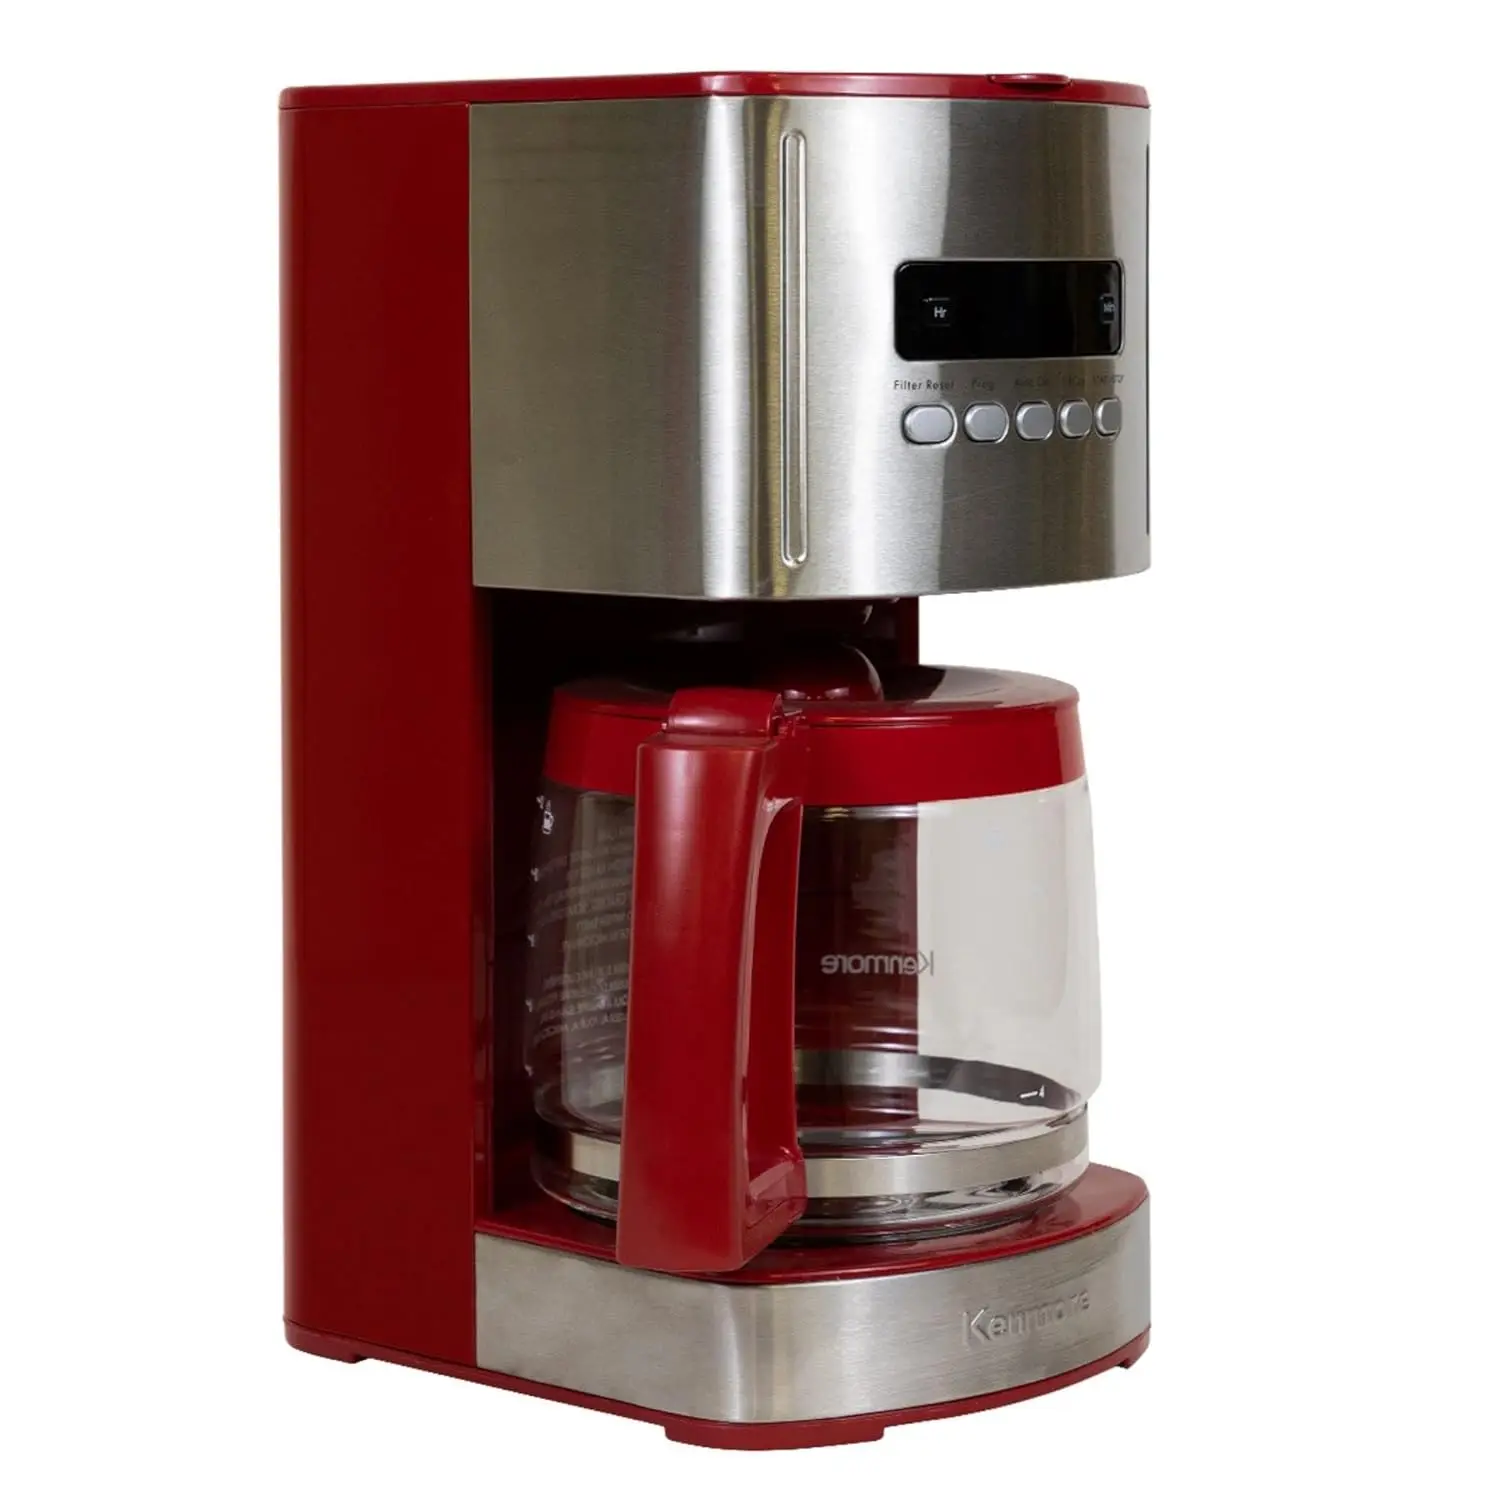 

Control 12-cup Programmable Coffee Maker, Red and Stainless Steel Drip Coffee Machine, Glass Carafe, Reusable Filter, Timer, Dig